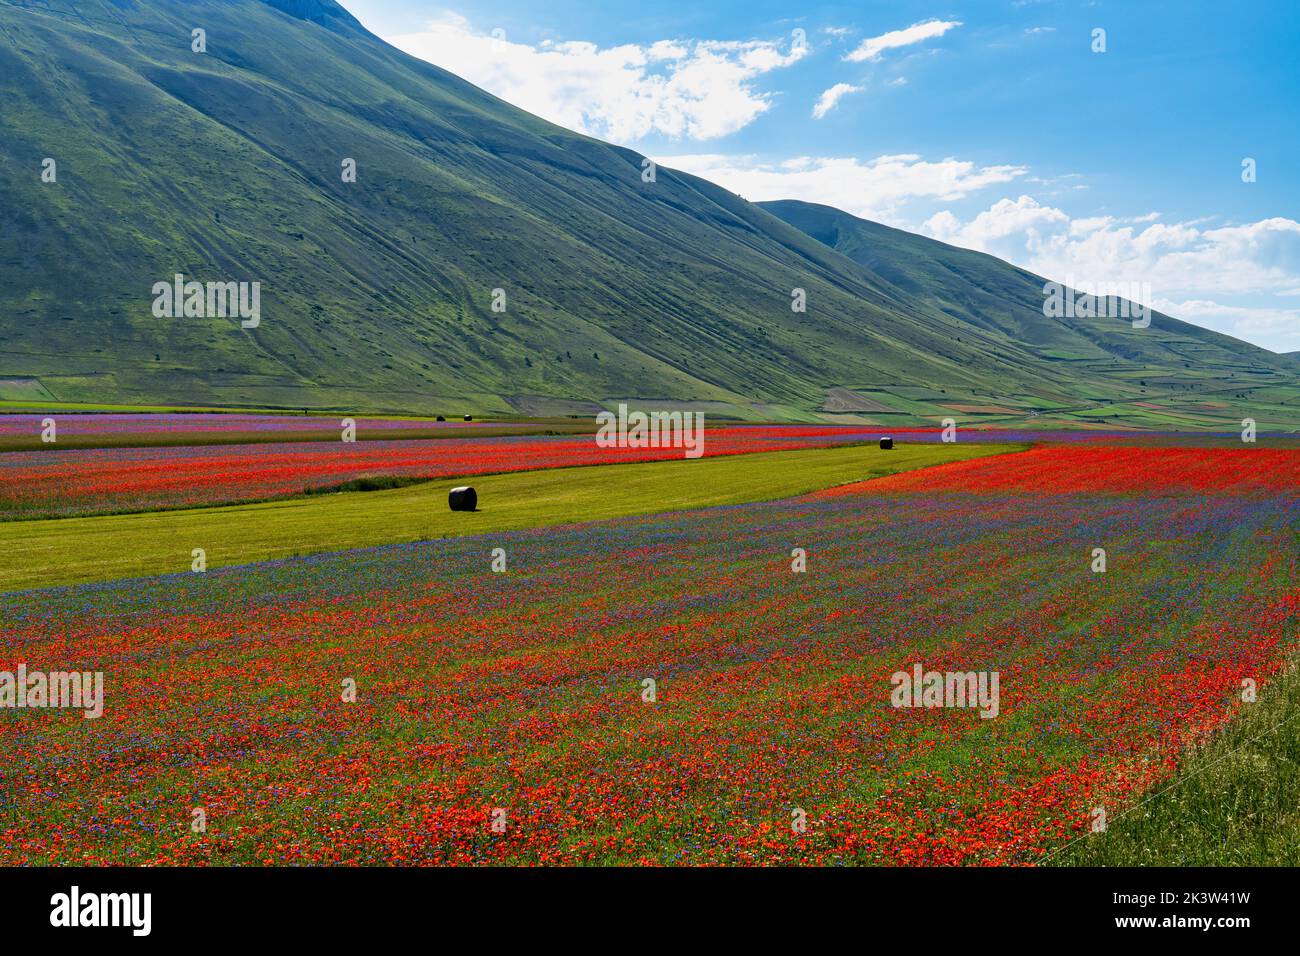 Lentil flowering with poppies and cornflowers in Castelluccio di Norcia, national park sibillini mountains, Italy, Europe Stock Photo